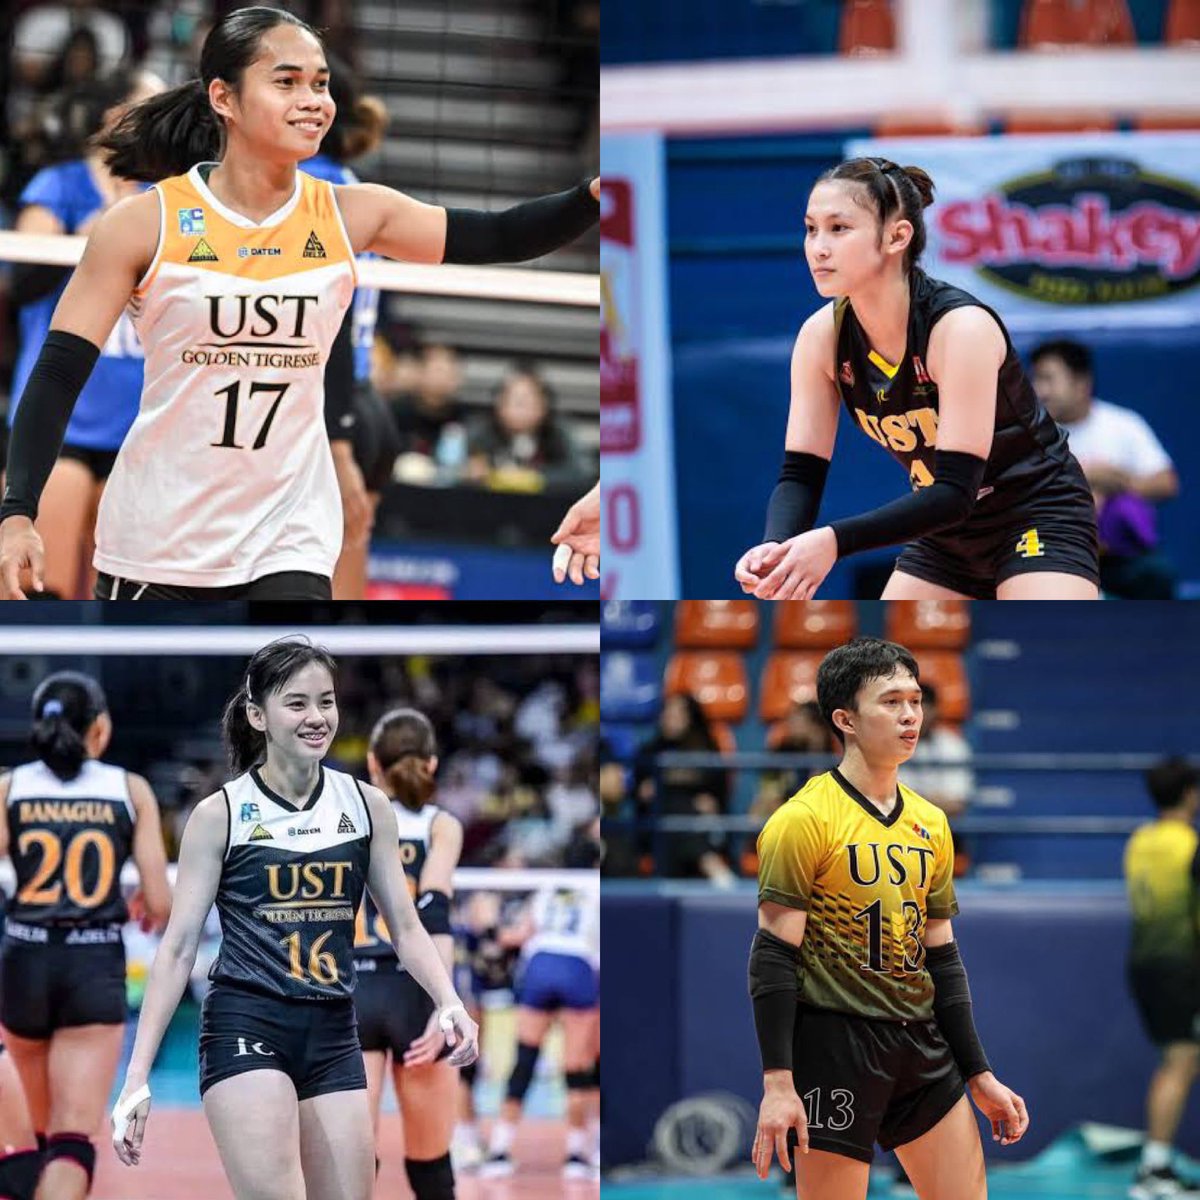 The UAAP Volleyball Awarding Ceremonies will be at 1:00pm today prior to the UST-NU Men’s Volleyball Game 2. 

Let us make sure to cheer for our athletes who will be recognized today!

#GoUSTE